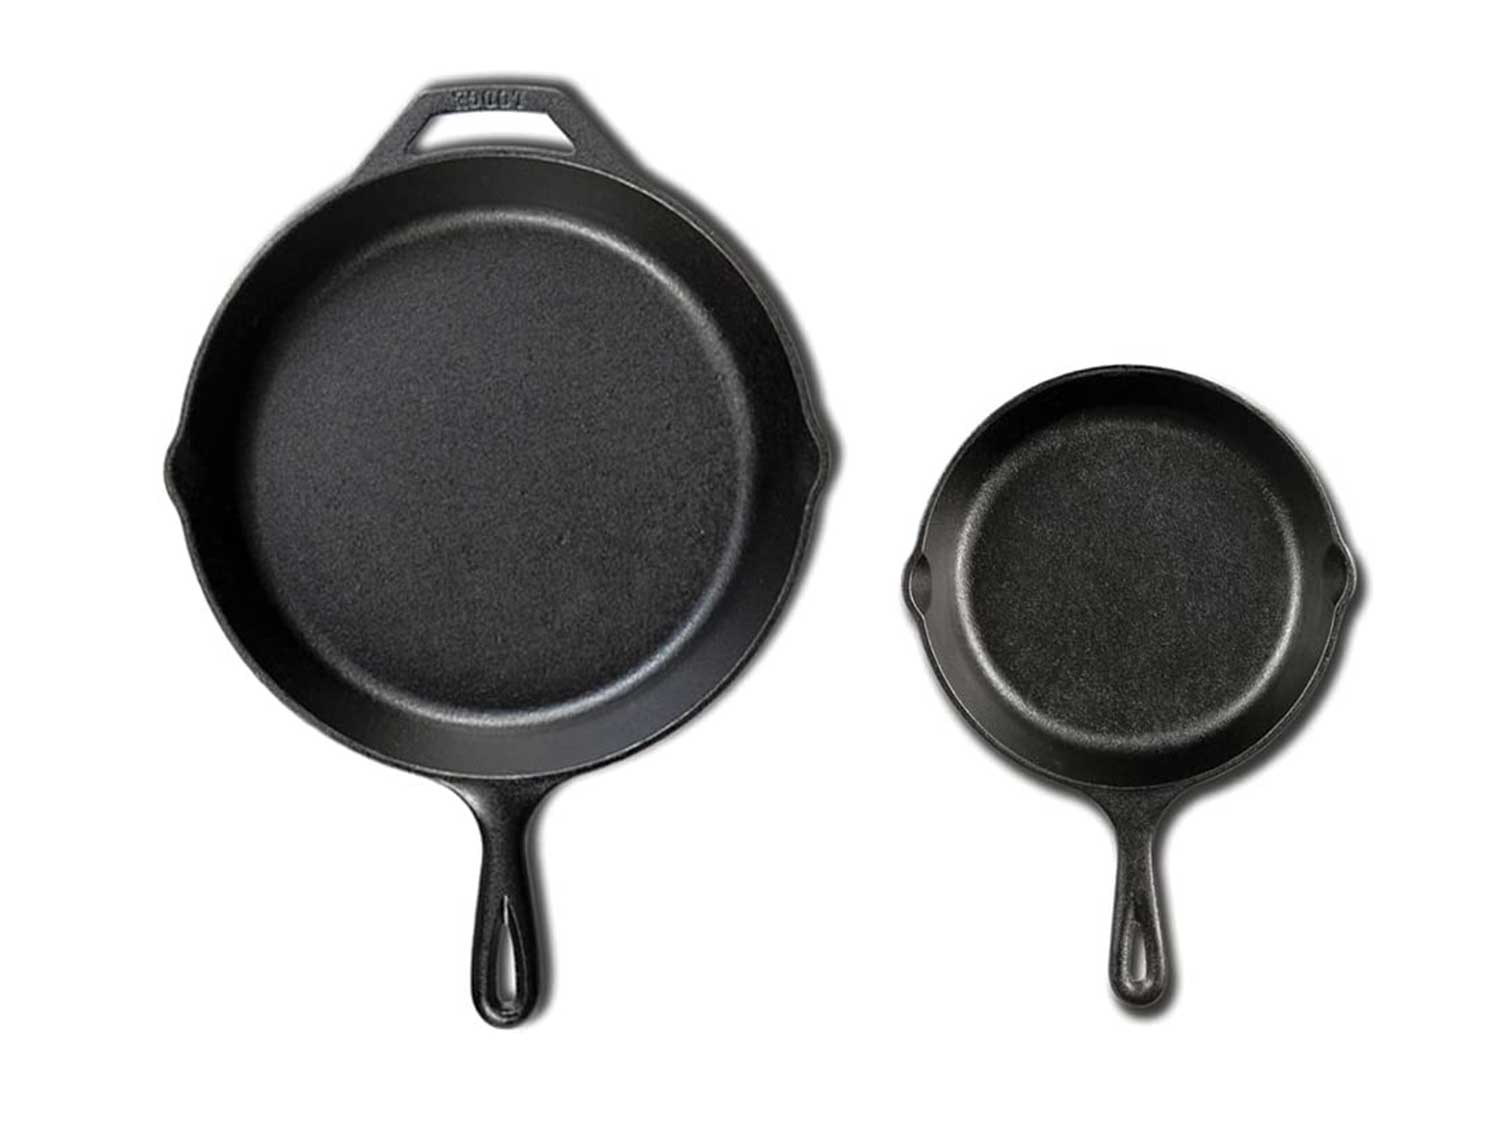 Everything You Need to Know About Using Cast Iron Cookware